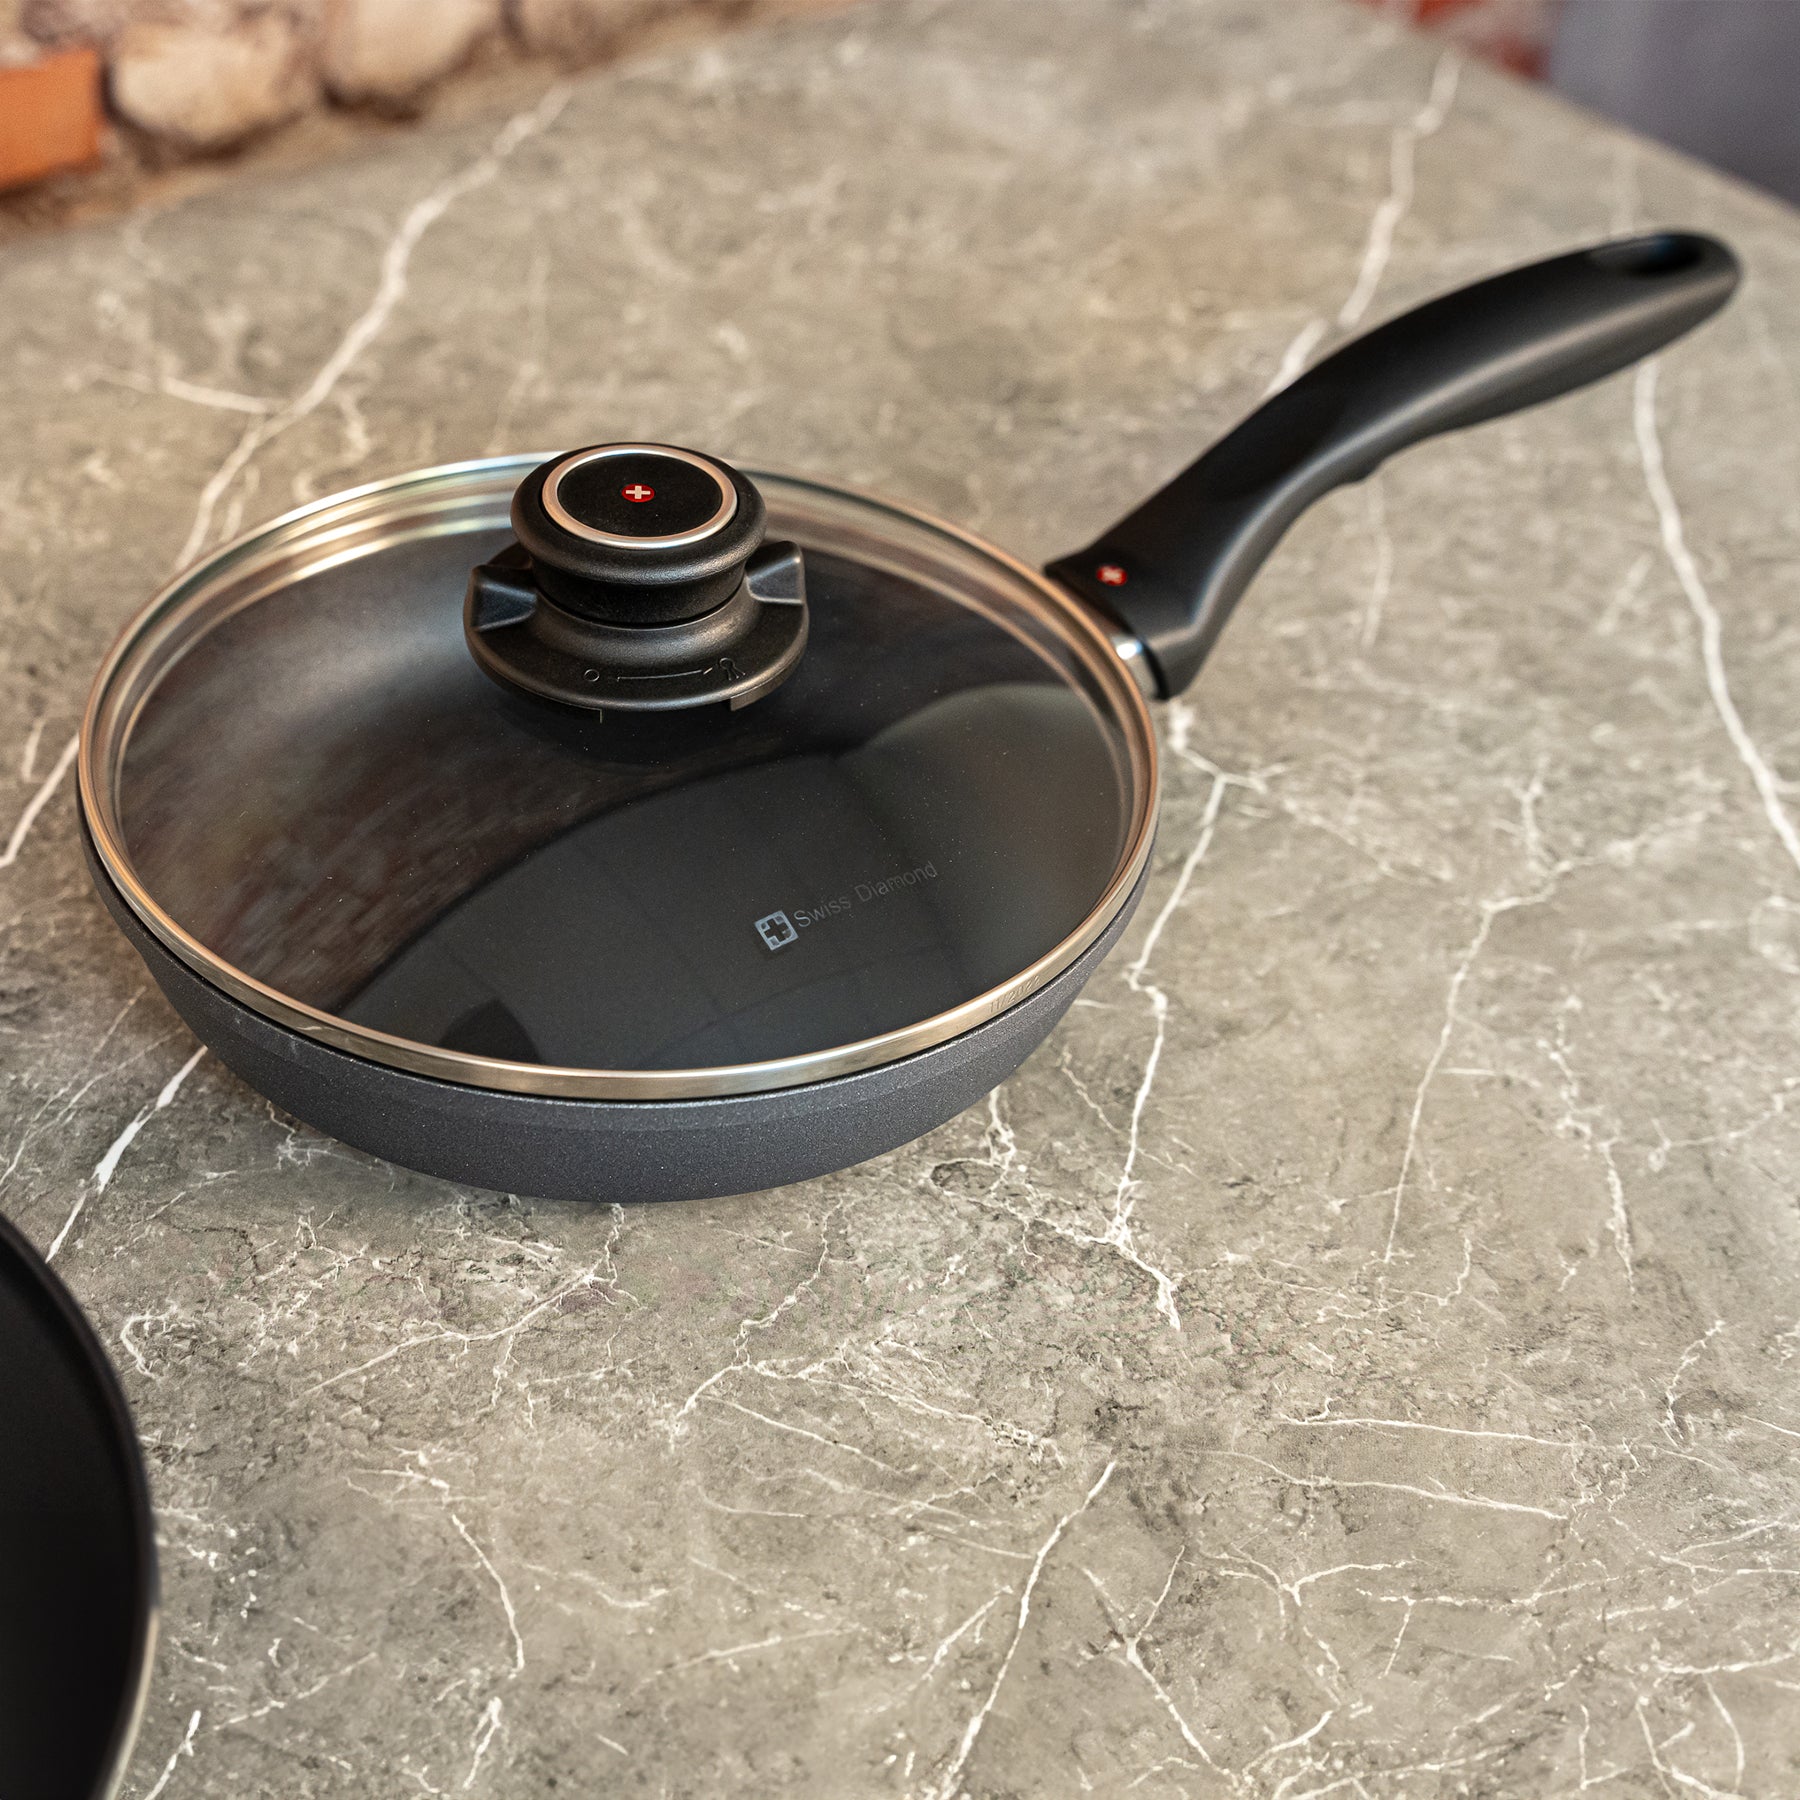 HD Nonstick Fry Pan with Glass Lid in use on marble kitchen counter